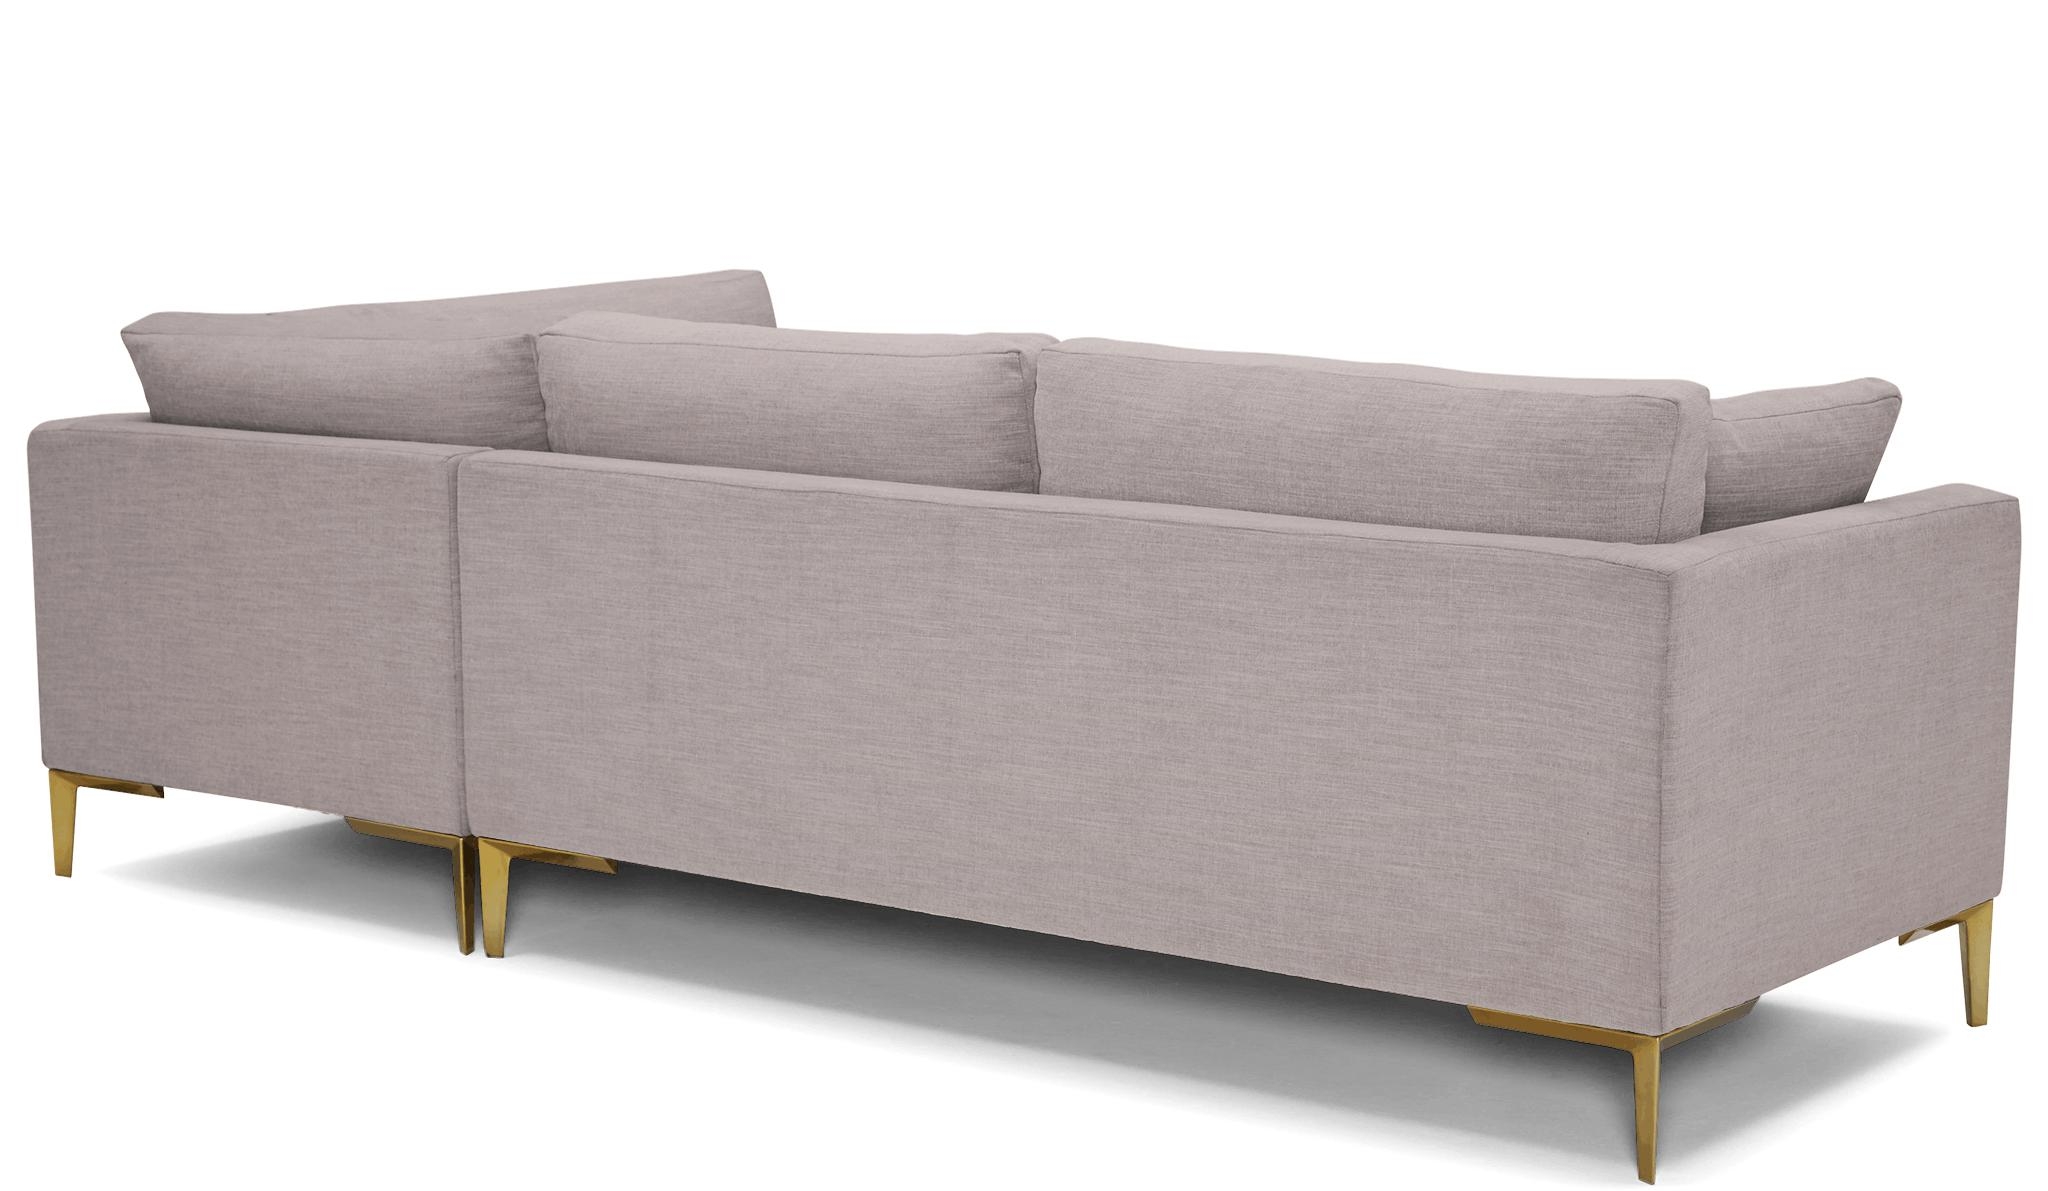 Purple Ainsley Mid Century Modern Sectional with Bumper - Sunbrella Premier Wisteria - Right  - Image 3